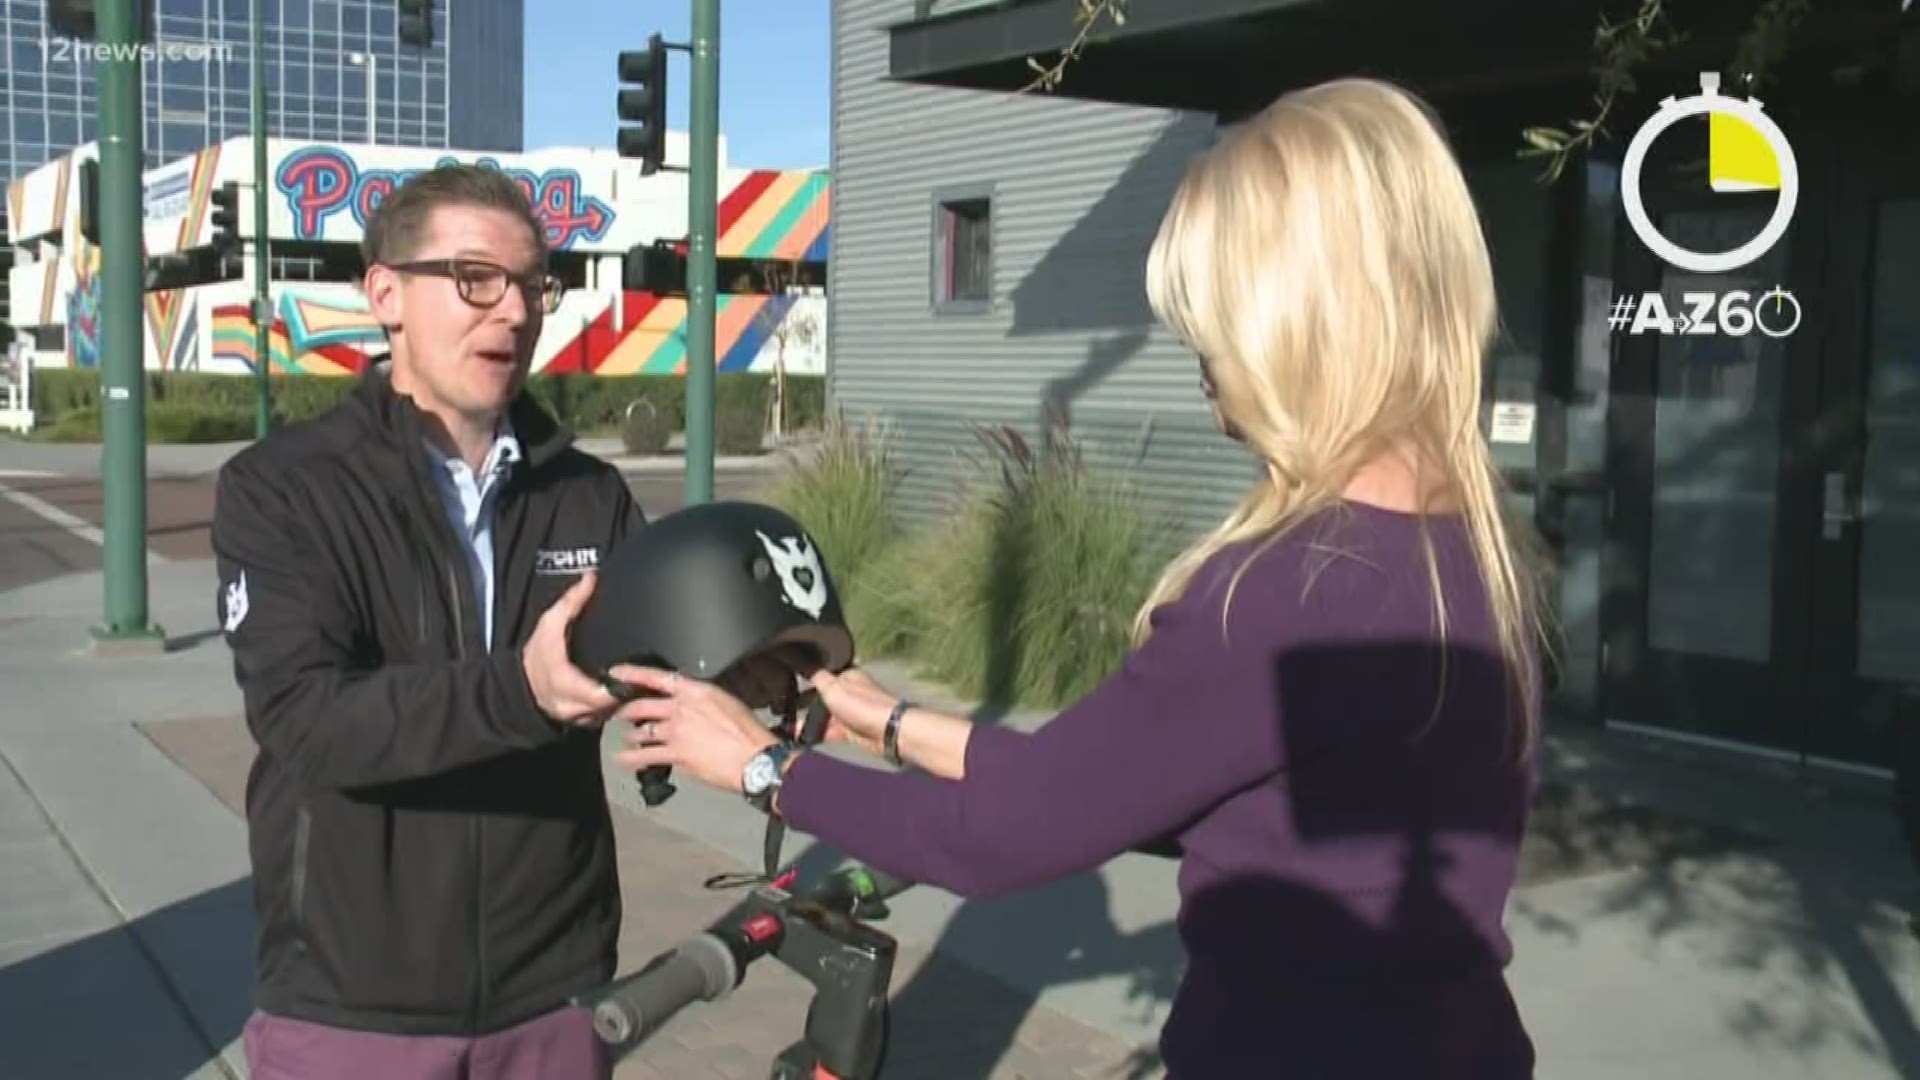 Krystle Henderson shares some important rules to abide by when riding scooters in downtown Phoenix. Time for some e-scooter etiquette.